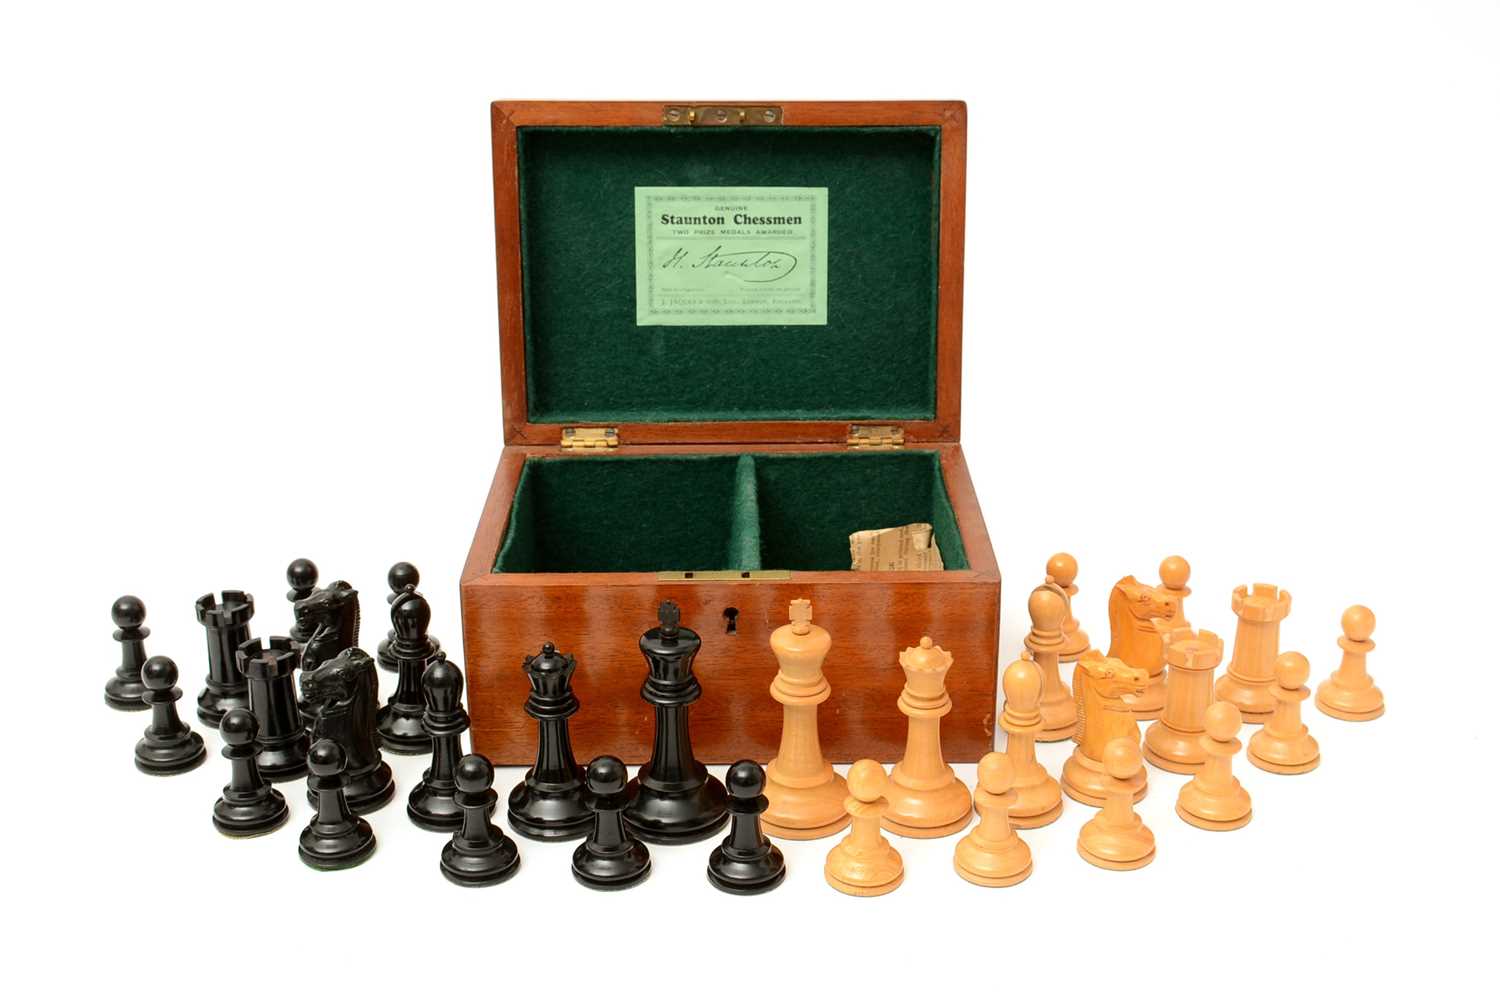 1203 - An early 20th Century cased Jacques Staunton chess set, 